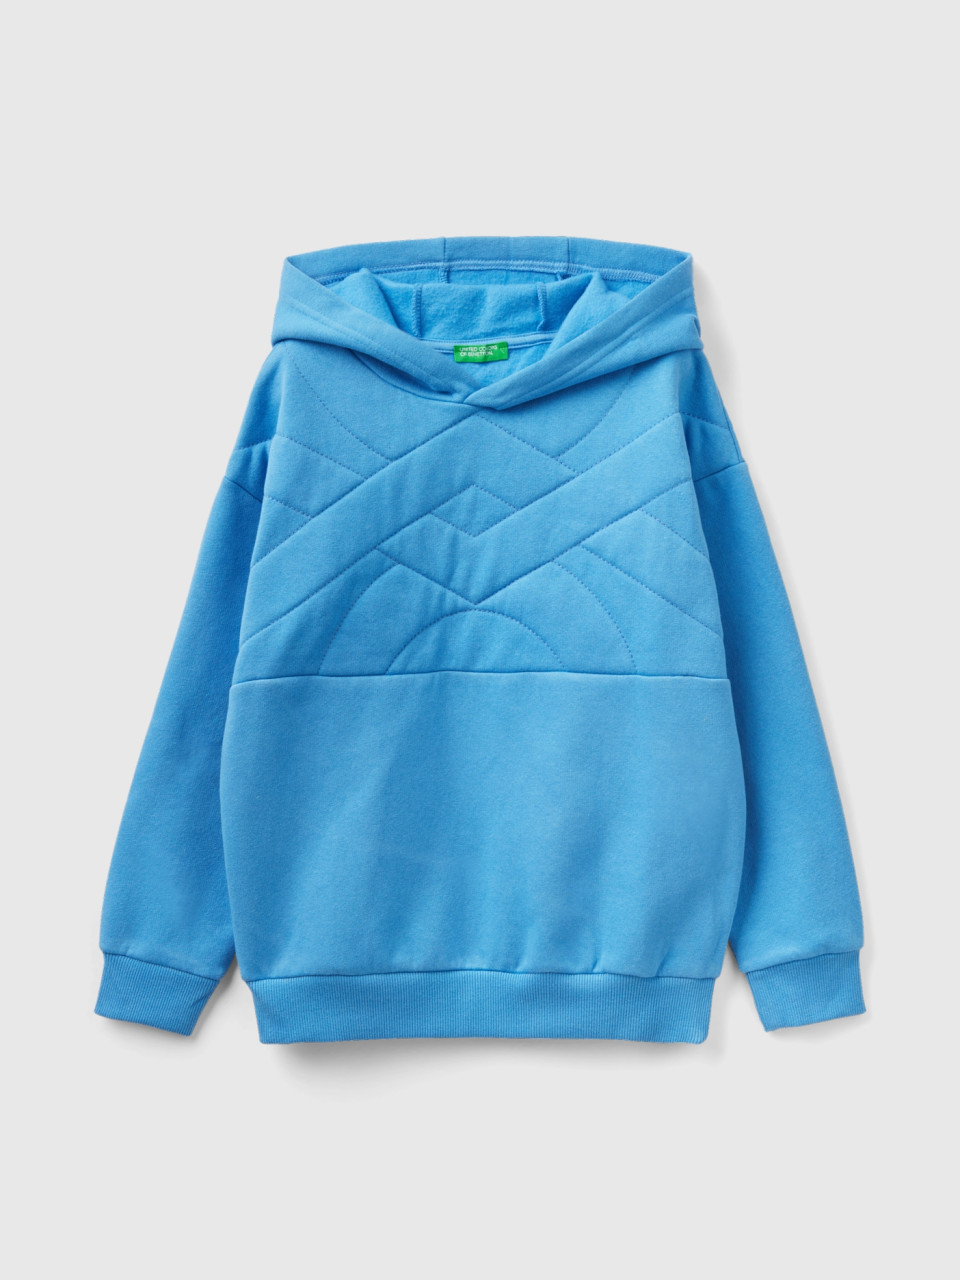 Benetton, Sweatshirt With Logo In Recycled Fabric, Light Blue, Kids